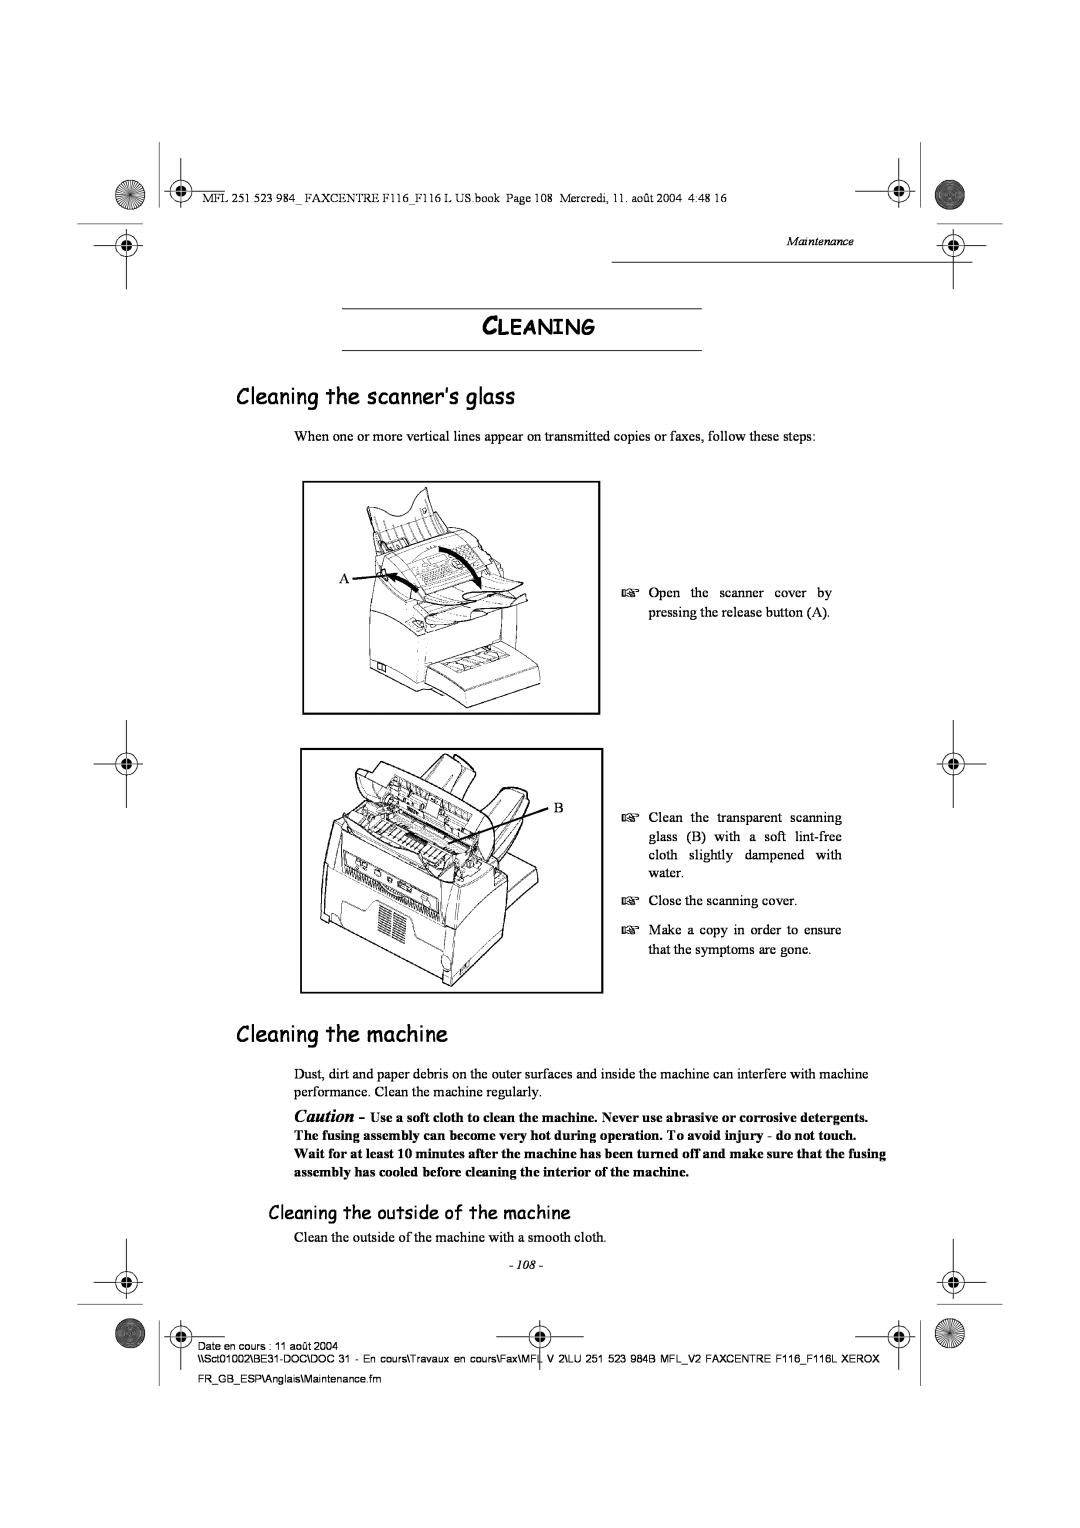 Xerox F116 user manual Cleaning the scanner’s glass, Cleaning the machine, Cleaning the outside of the machine 